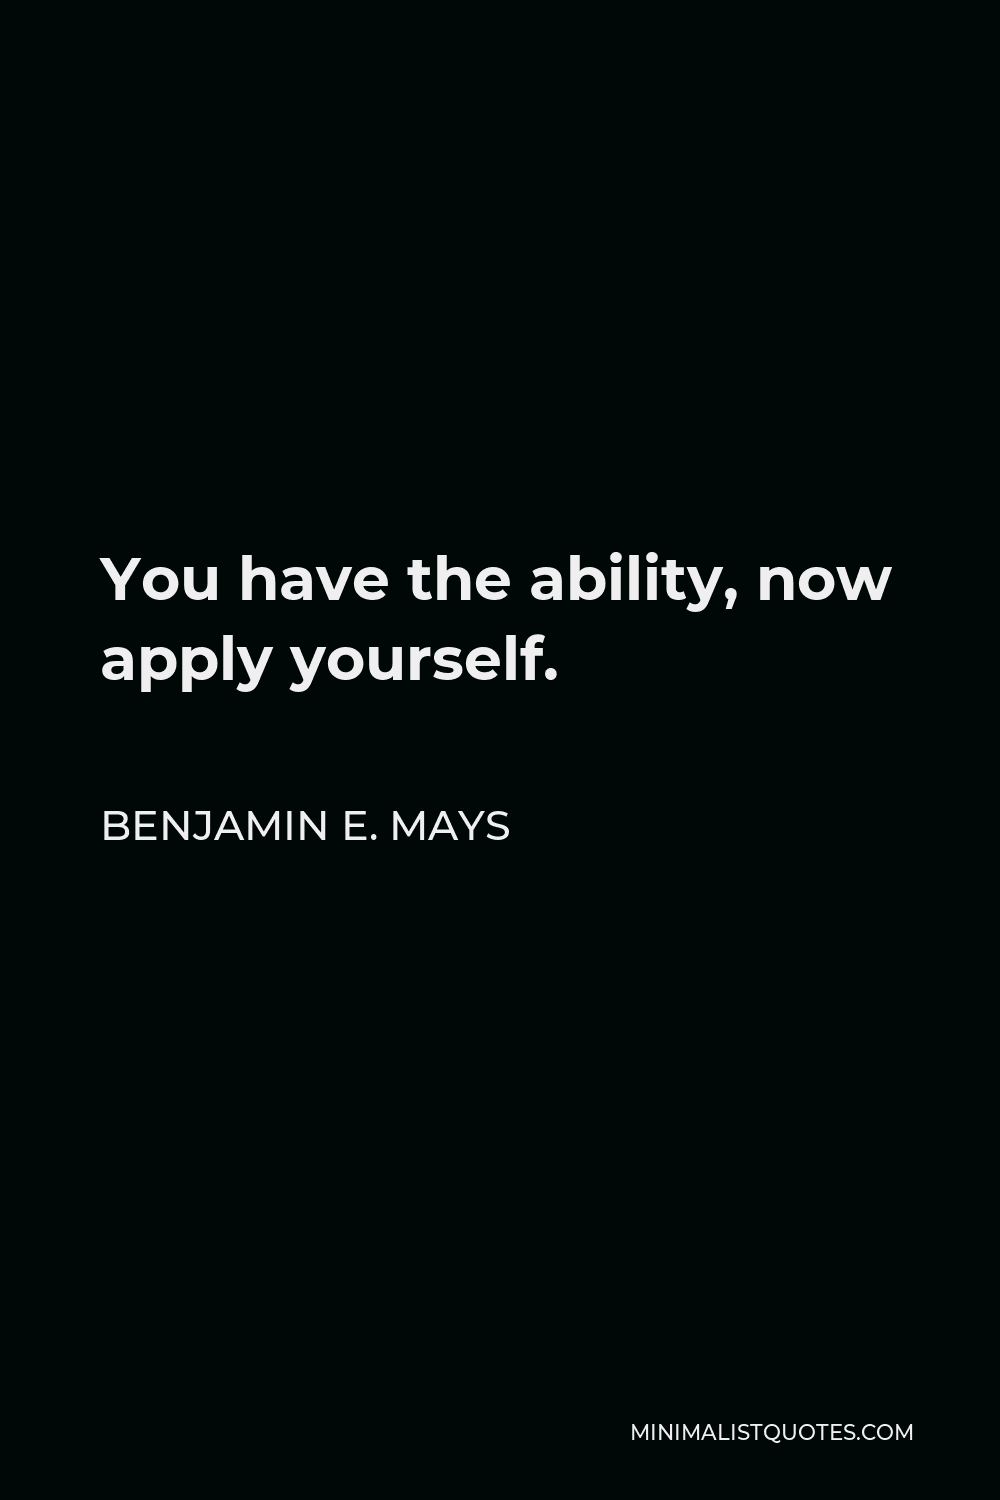 Benjamin E. Mays Quote - You have the ability, now apply yourself.